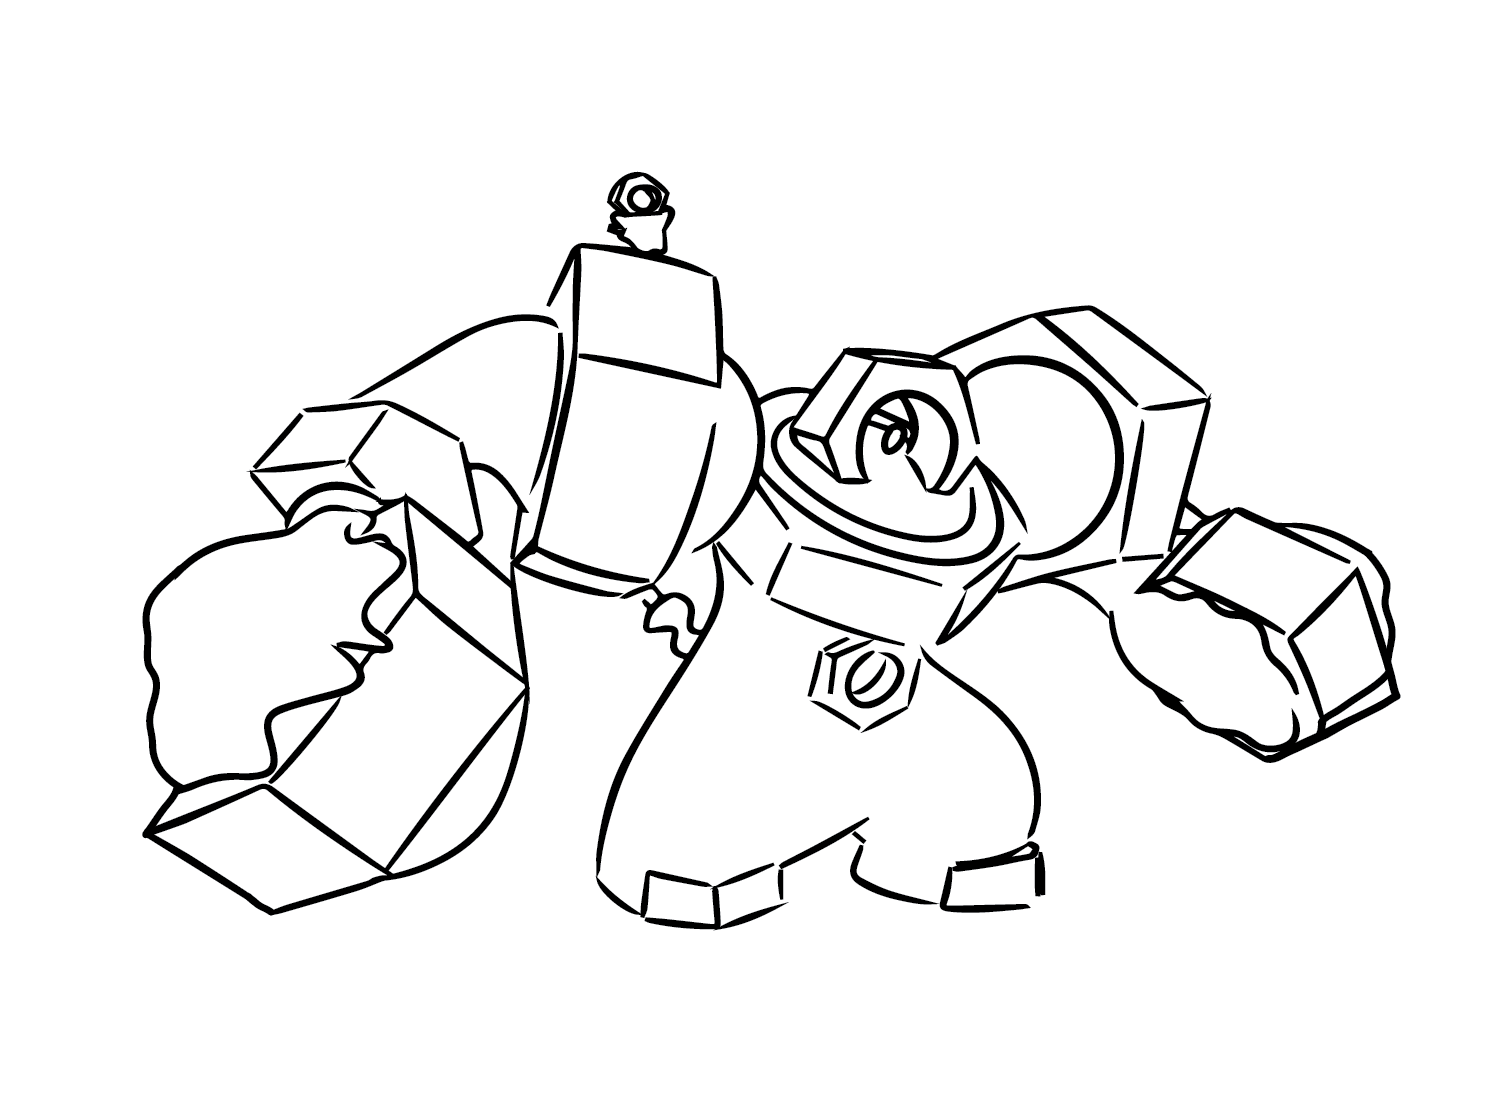 Melmetal to Download Coloring Page